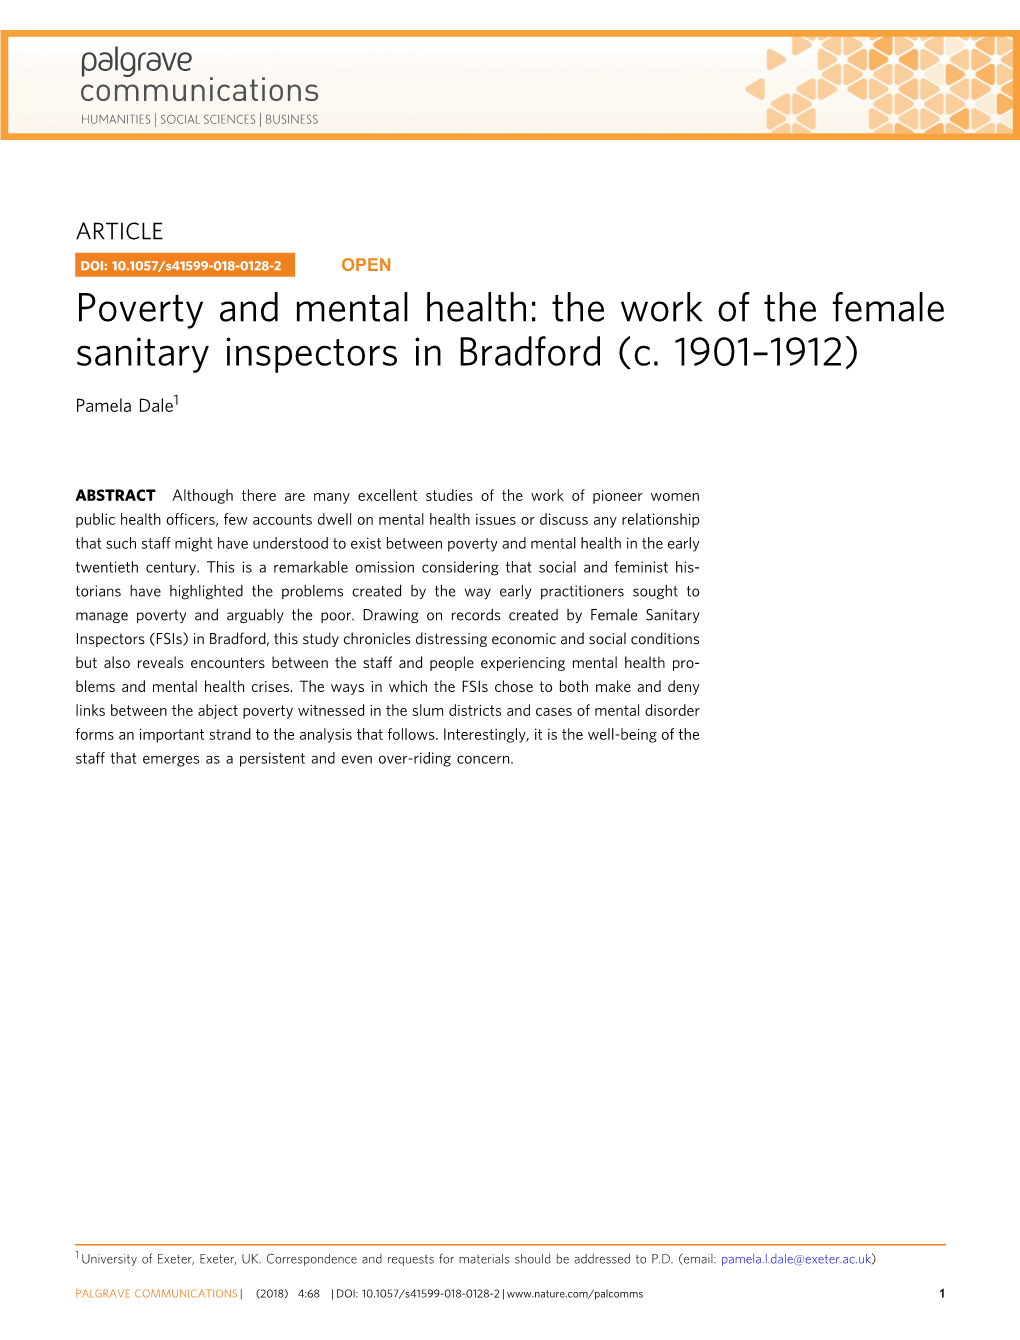 Poverty and Mental Health: the Work of the Female Sanitary Inspectors in Bradford (C